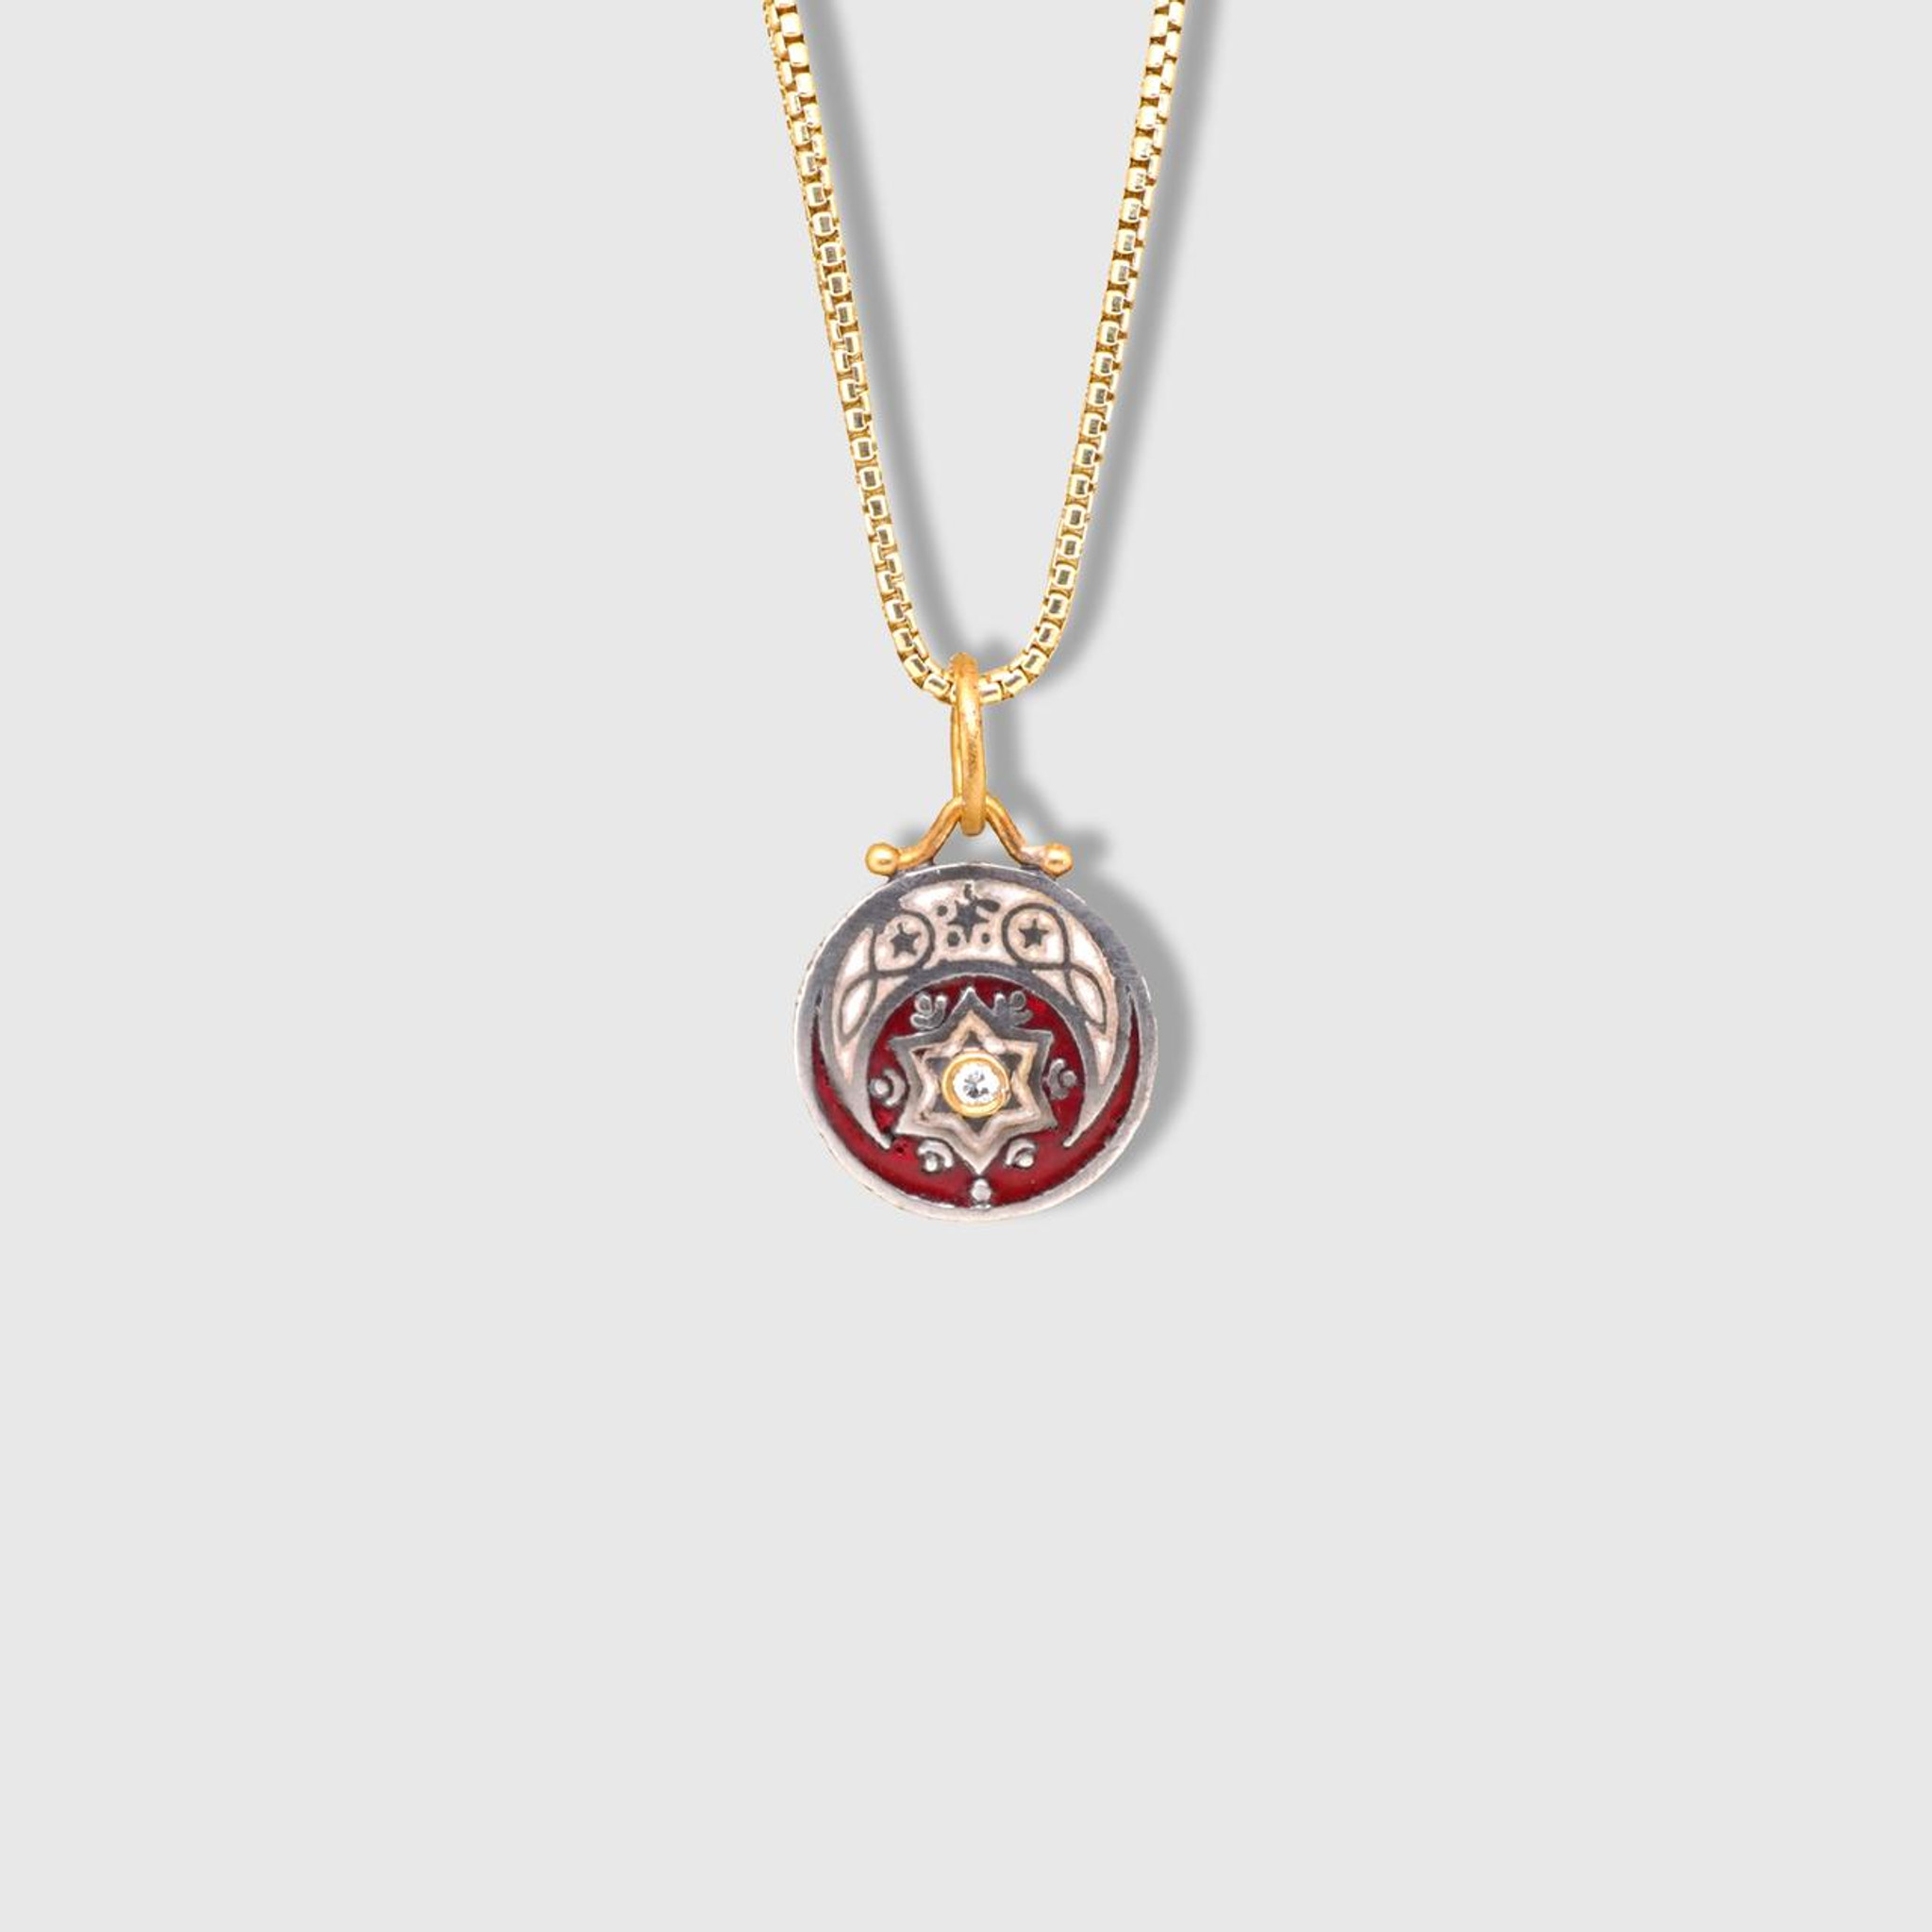 Moon and Star Enameled Pendant Charm in Red and Silver, Pendant Necklace with Diamond, 24kt Gold and Silver by Prehistoric Works of Istanbul, Turkey